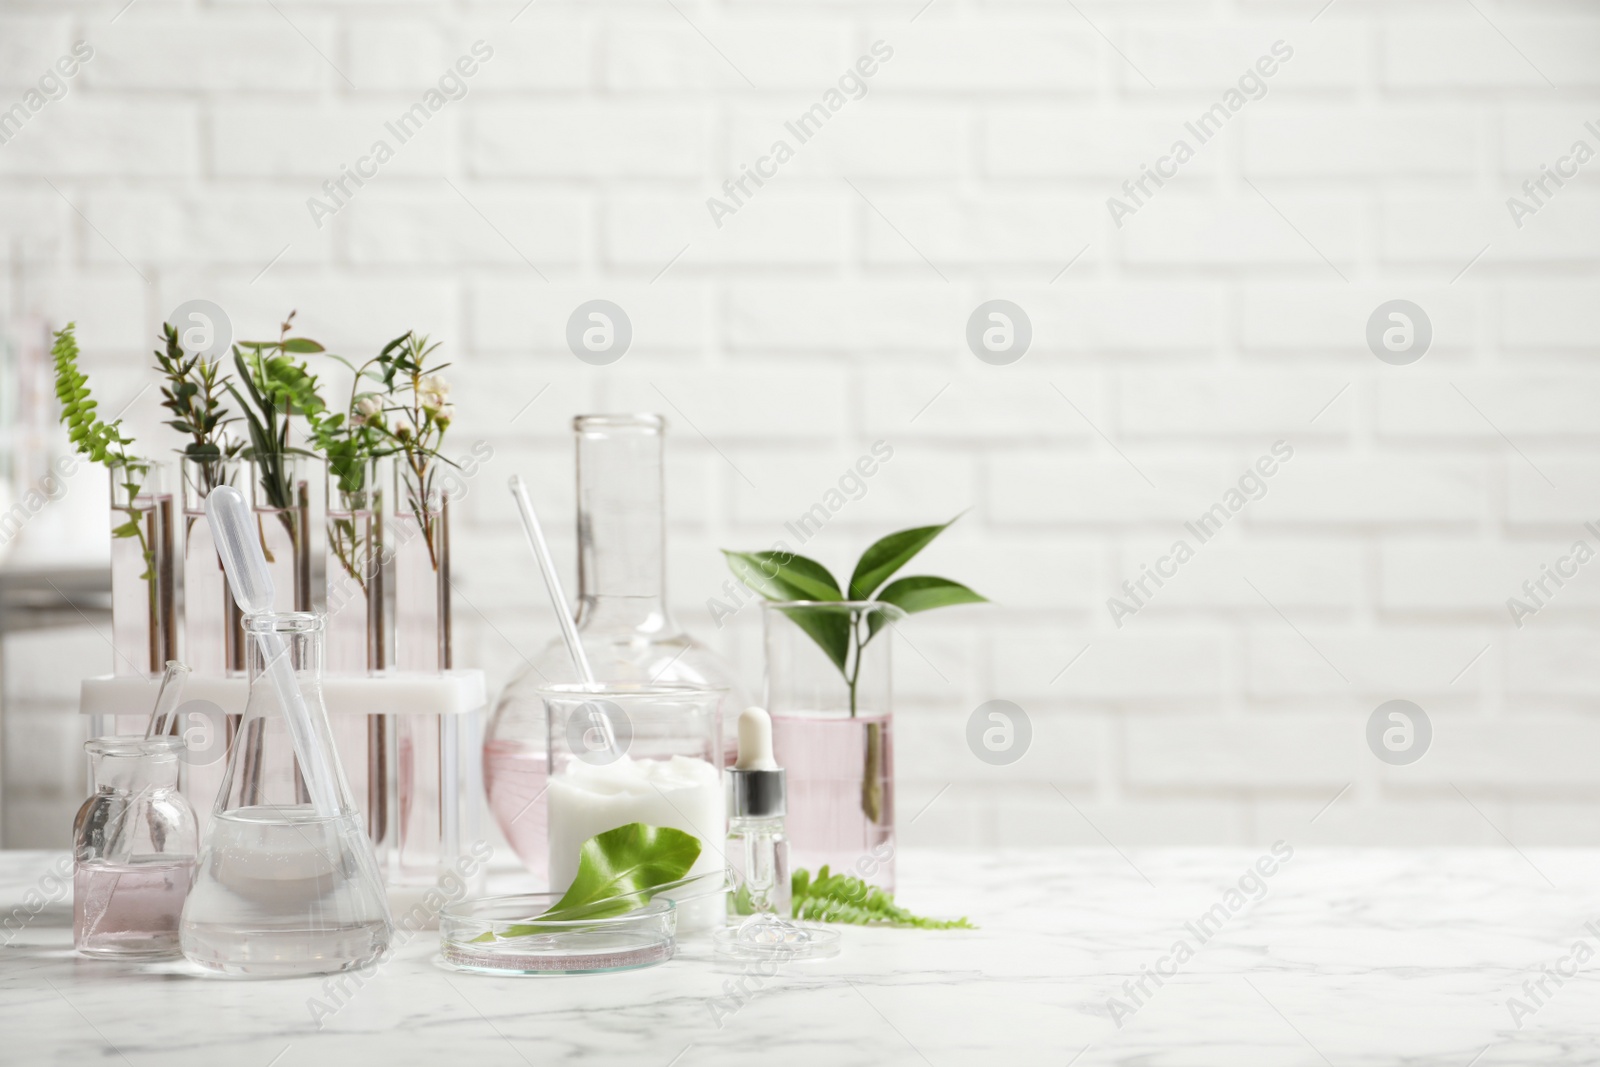 Photo of Organic cosmetic products, natural ingredients and laboratory glassware on white marble table, space for text